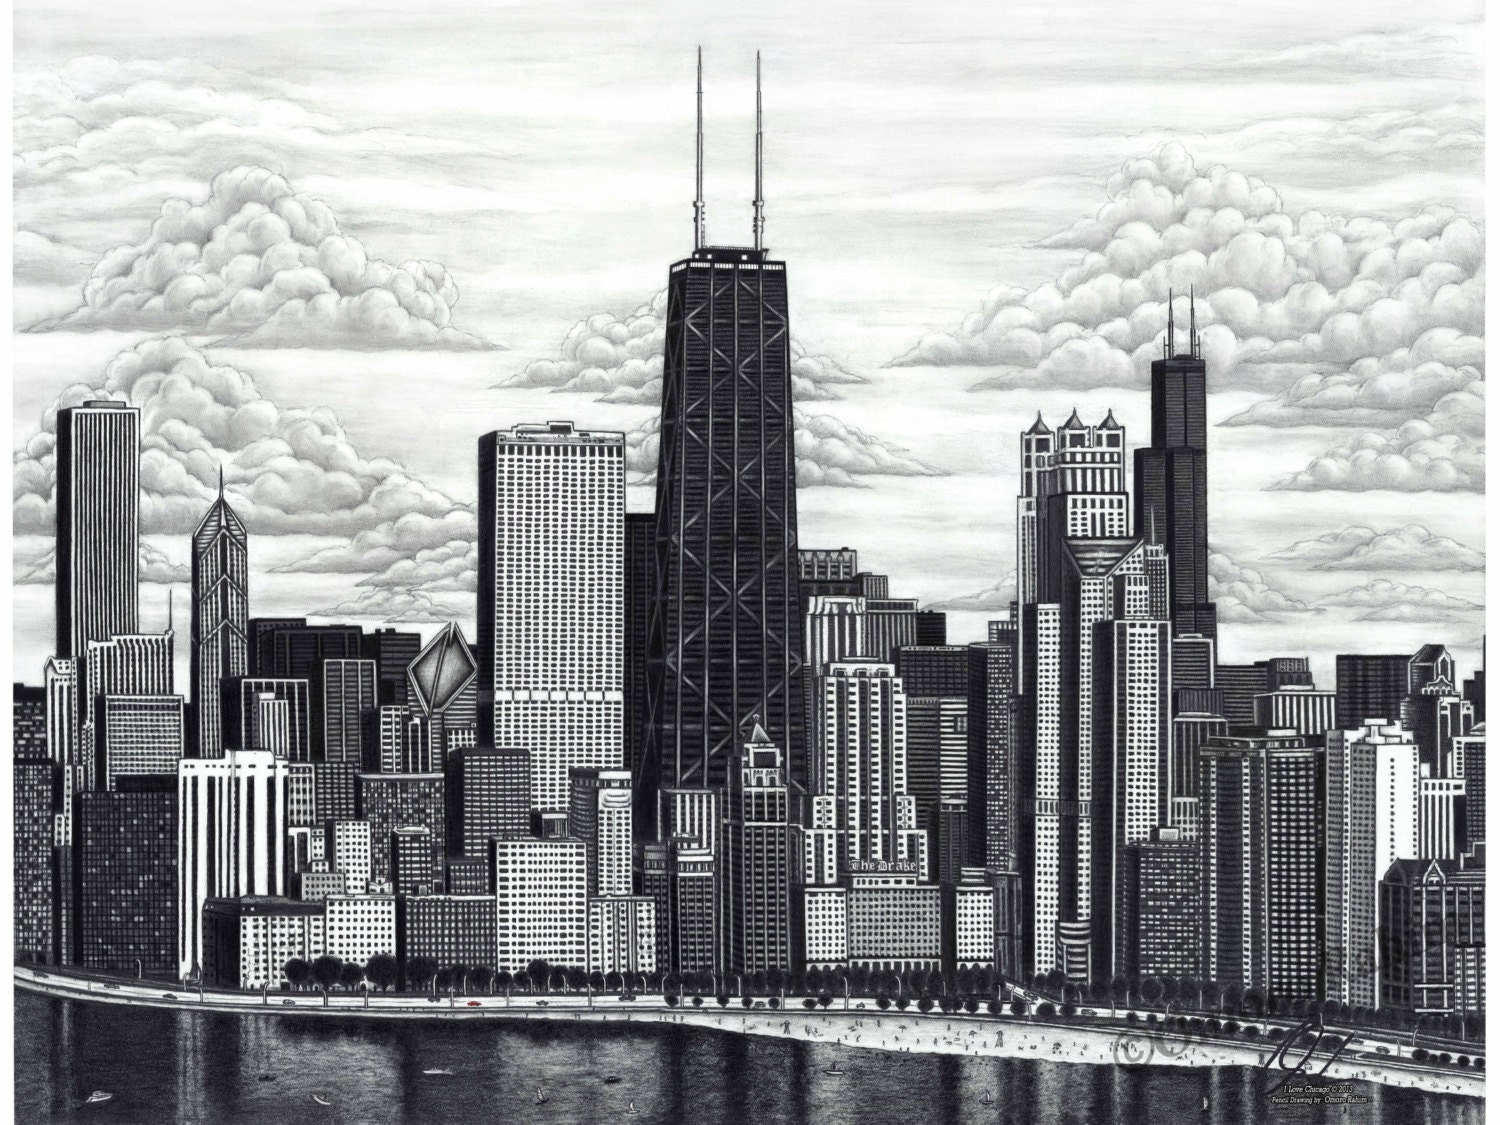 Chicago skyline drawing direct from artist 18x24 inch print.